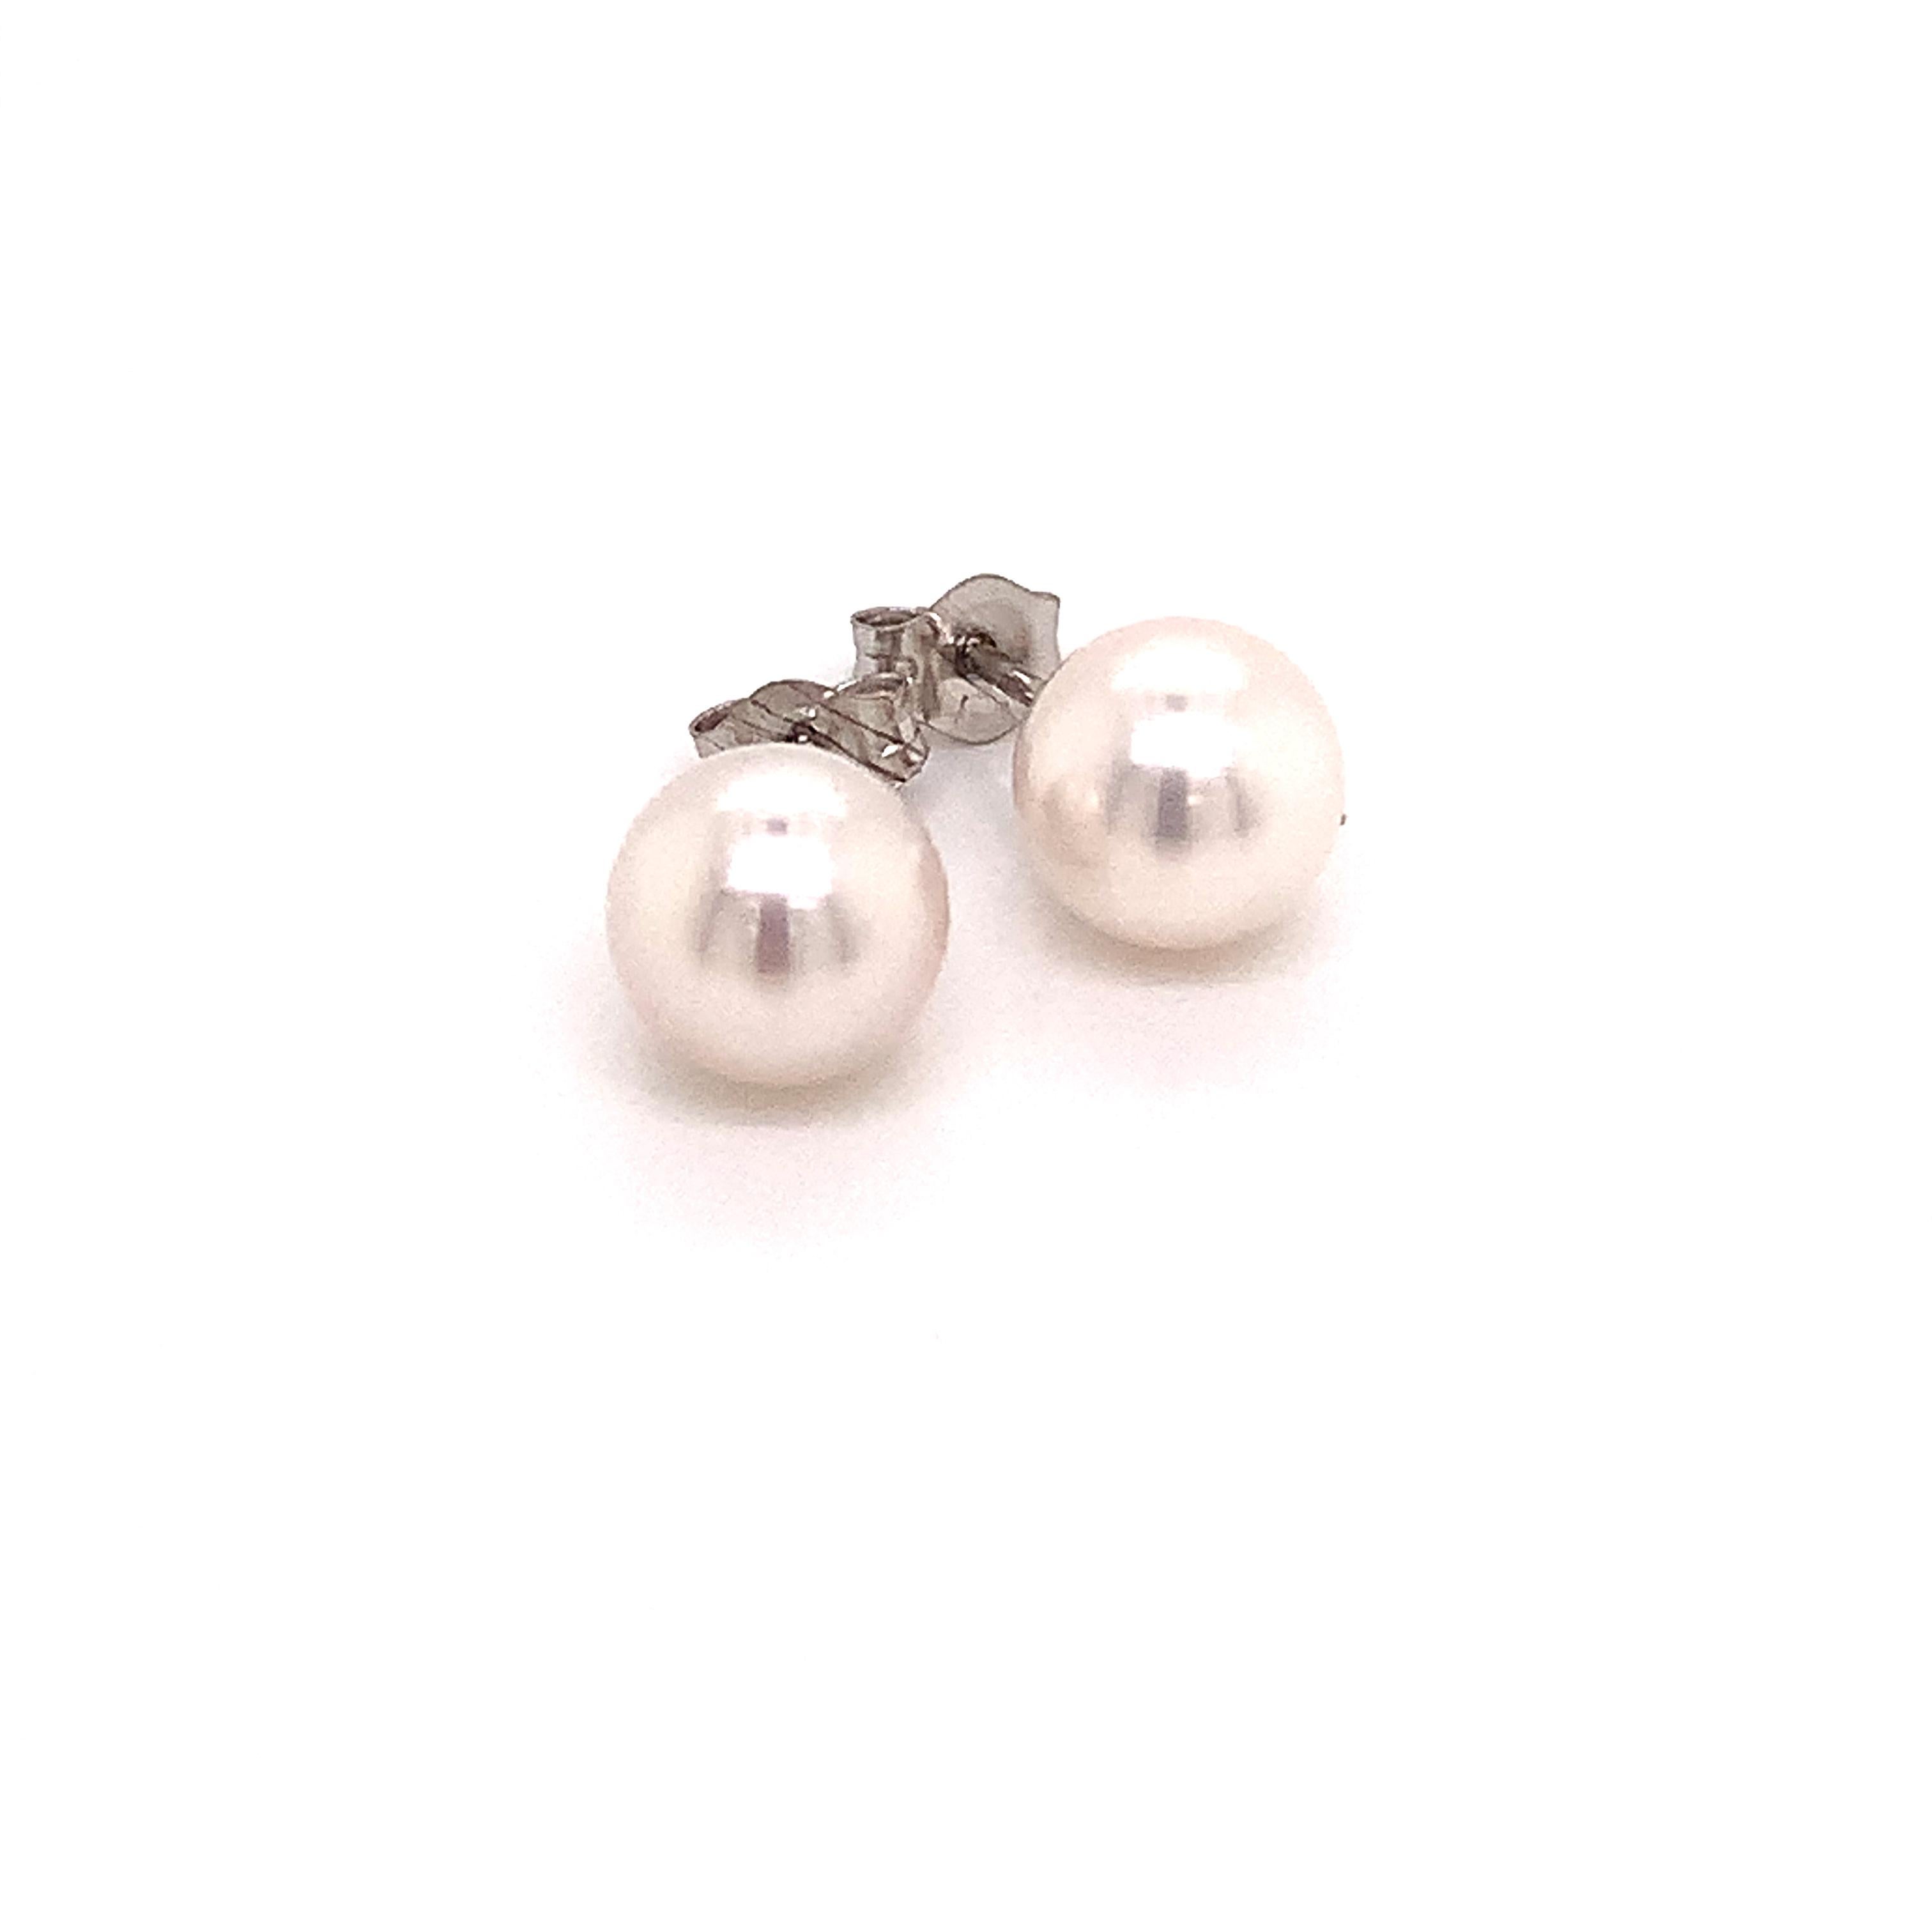 Akoya Pearl Stud Earrings 14k White Gold 6.48 mm Certified $499 015849

If a video of this item is not available in this listing please request a link through the message center and we will be more than happy to send you a link.

This is a One of a